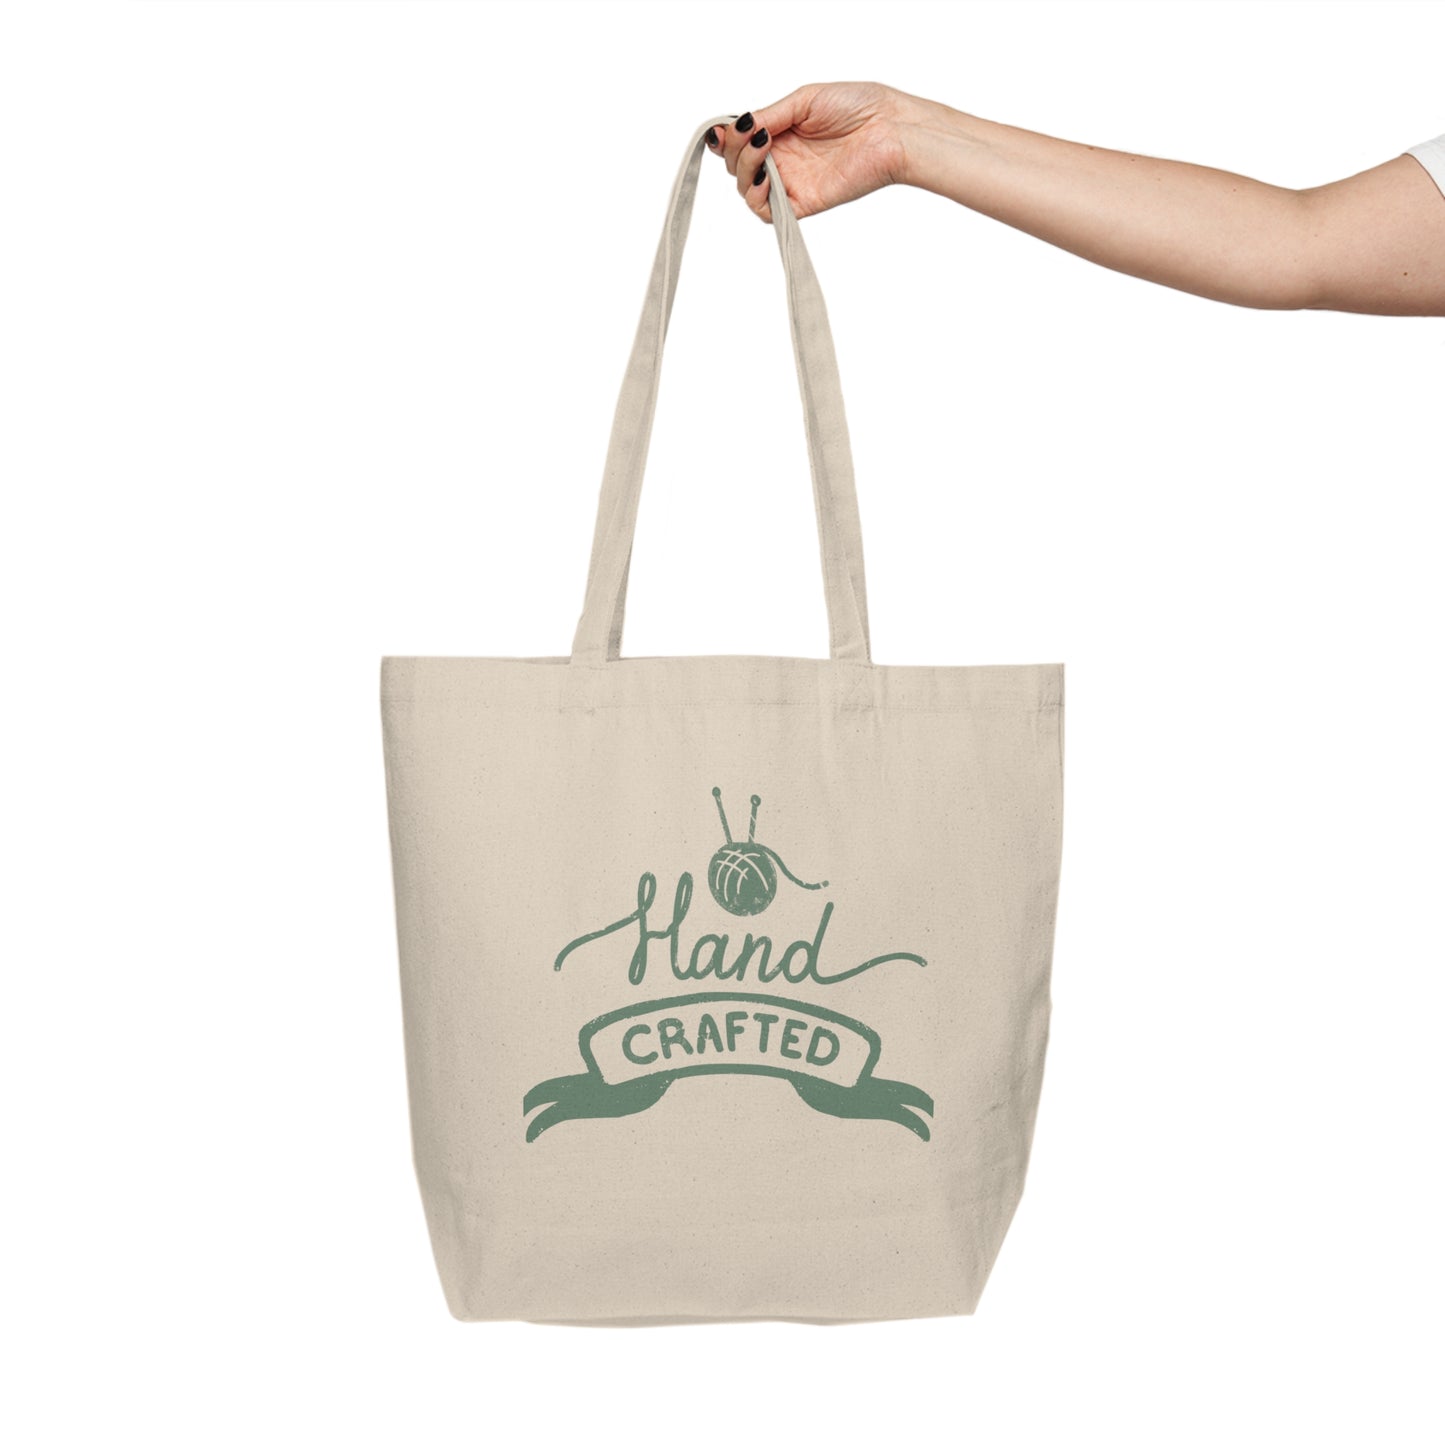 Knitting Canvas Tote